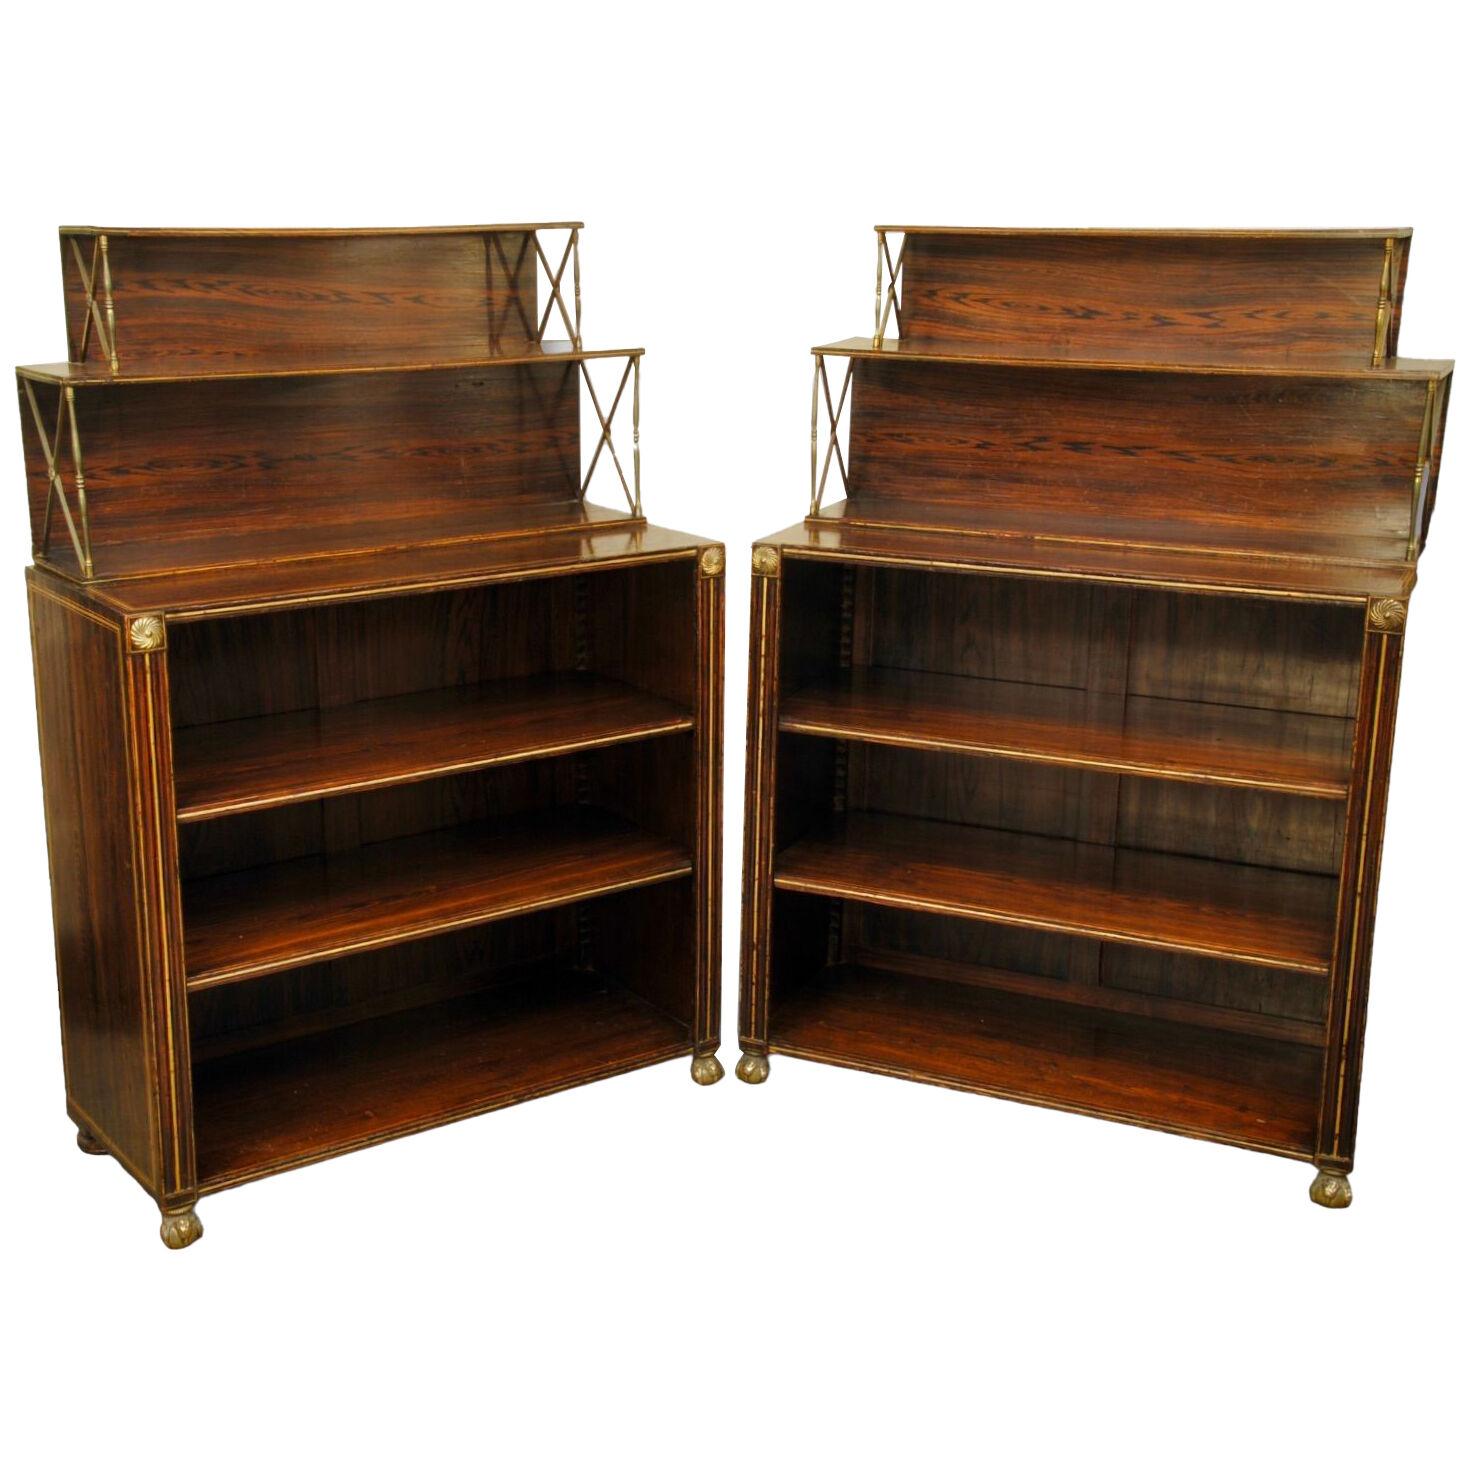 A SMART PAIR OF REGENCY SIMULATED ROSEWOOD OPEN BOOKCASES